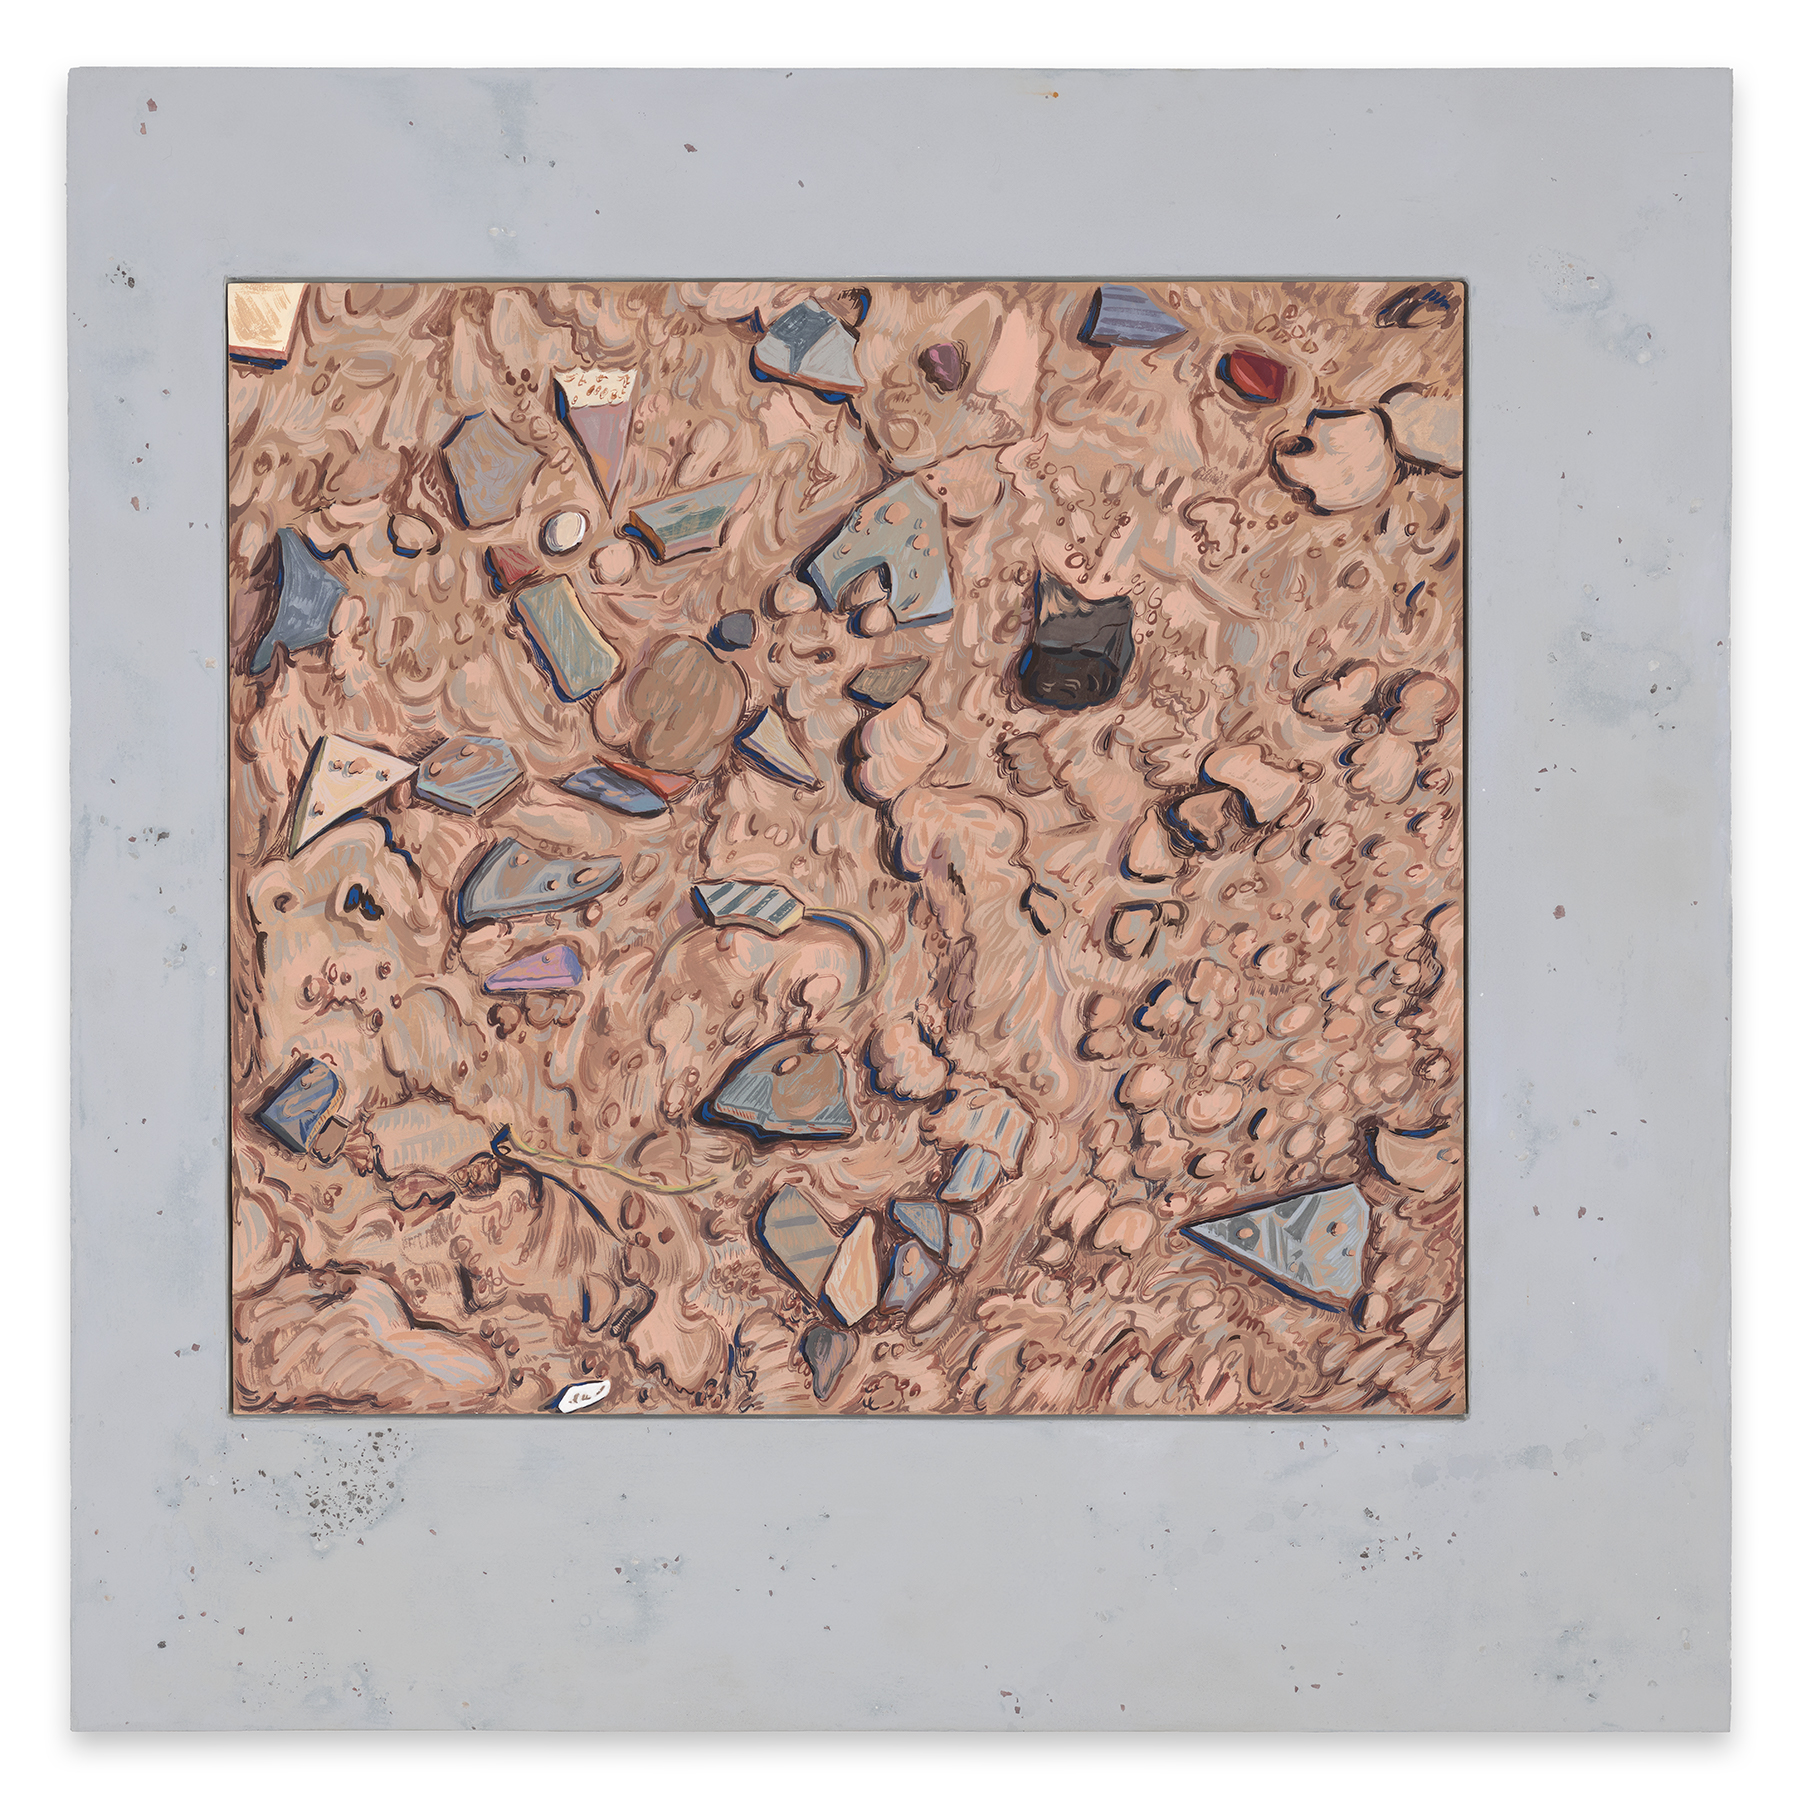 This image shows a painting which is framed in a pigmented pastel grey panel that includes fragments of earth and rocks from the sites where the paintings were made. This painting reveals a bird’s-eye view of an array of potsherds that are sitting or wedged into the desiccated soil. Potsherds, in New Mexico, are broken pieces of pueblo pottery that tend to surface on the ground after a rain storm. The soil is painted as if to show water erosion by using curly and circular brush strokes to accentuate numerous little clumps and clots of clay dirt and little passage ways for water to travel between around pottery sherds and fragments.  The scattered clusters of potsherds, rendered as precious artifacts, vary in shape, size, color, and design - some triangular or small broken rectangles, some with gray surfaces and black linear stripes and others with more intricate design patterns, incorporating faded blues, pinks, greens, and terra cotta colorings. This painting is like a magnifying glass for the viewer, allowing one to reach down and touch.